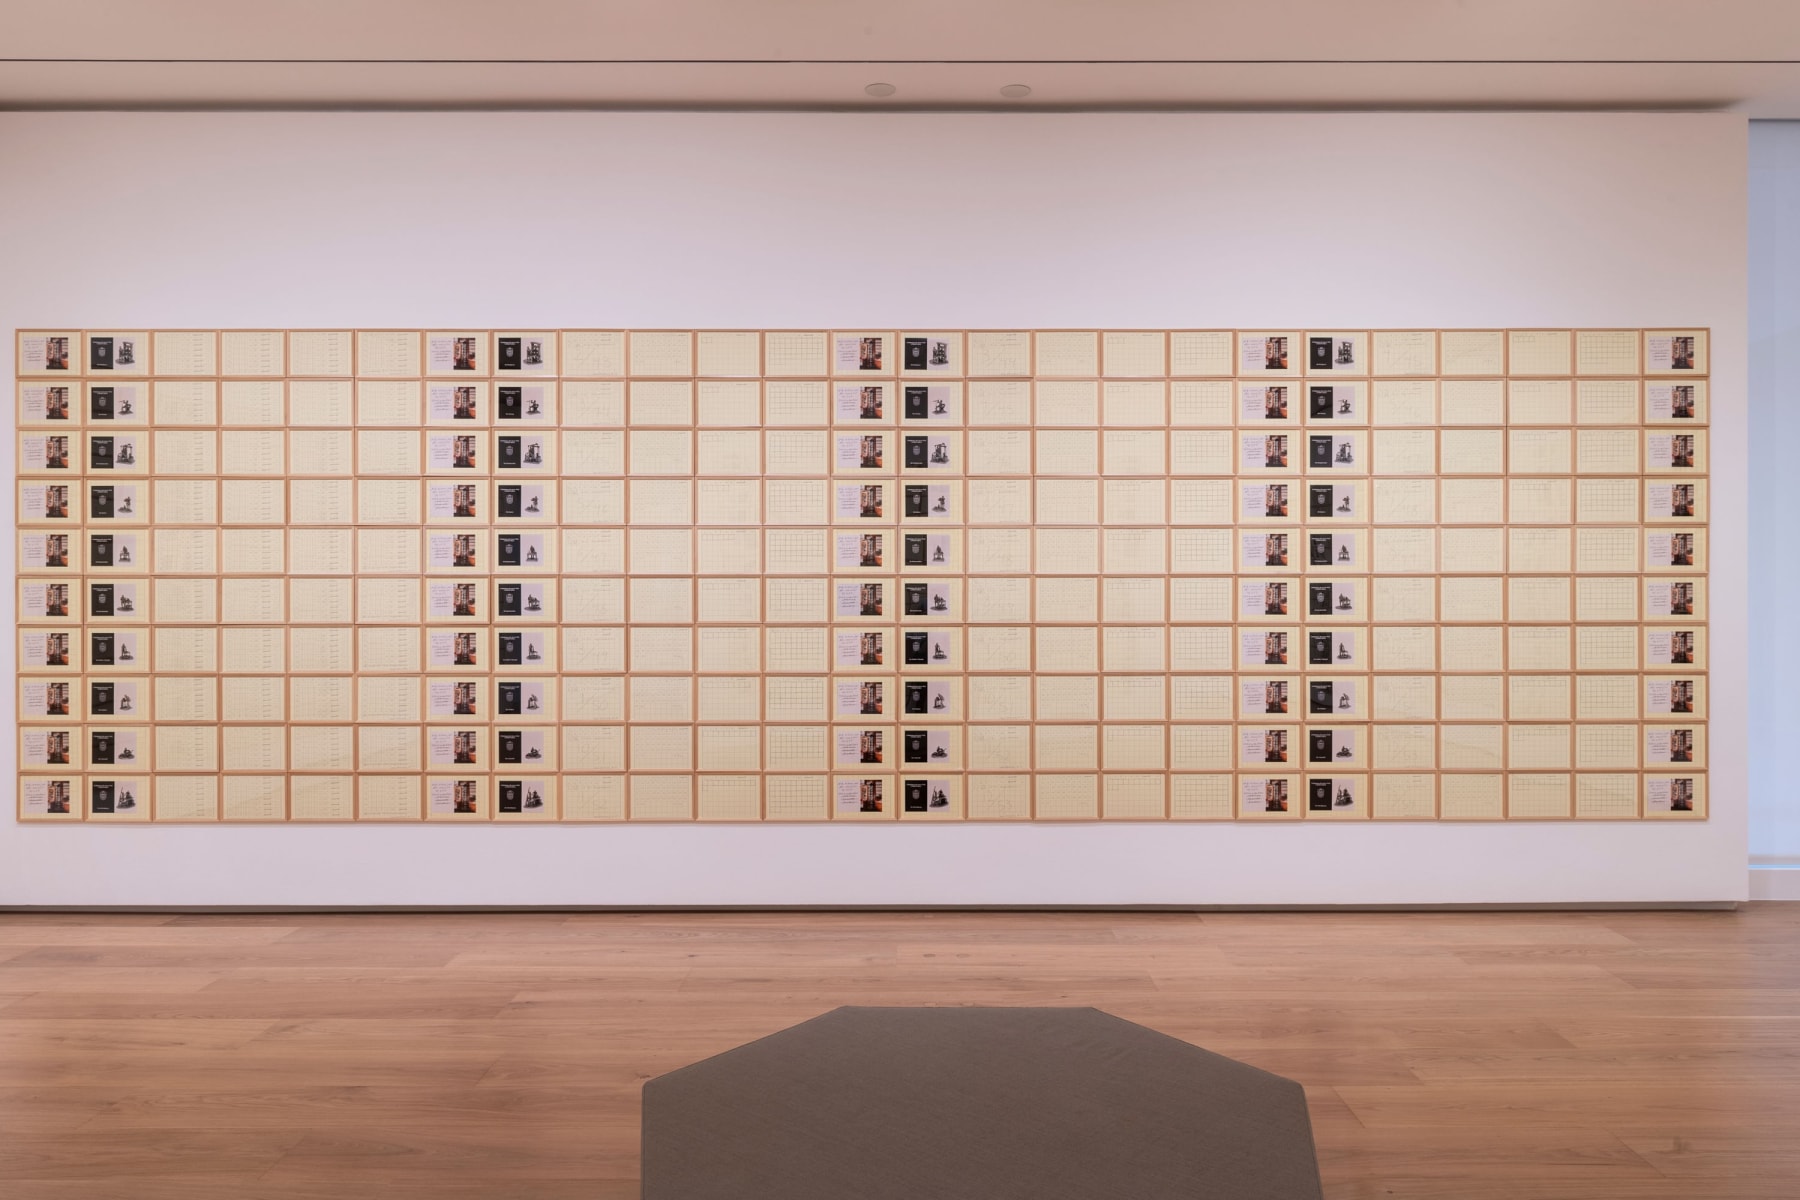 Hanne Darboven - Writing Time - Viewing Room - Petzel Gallery